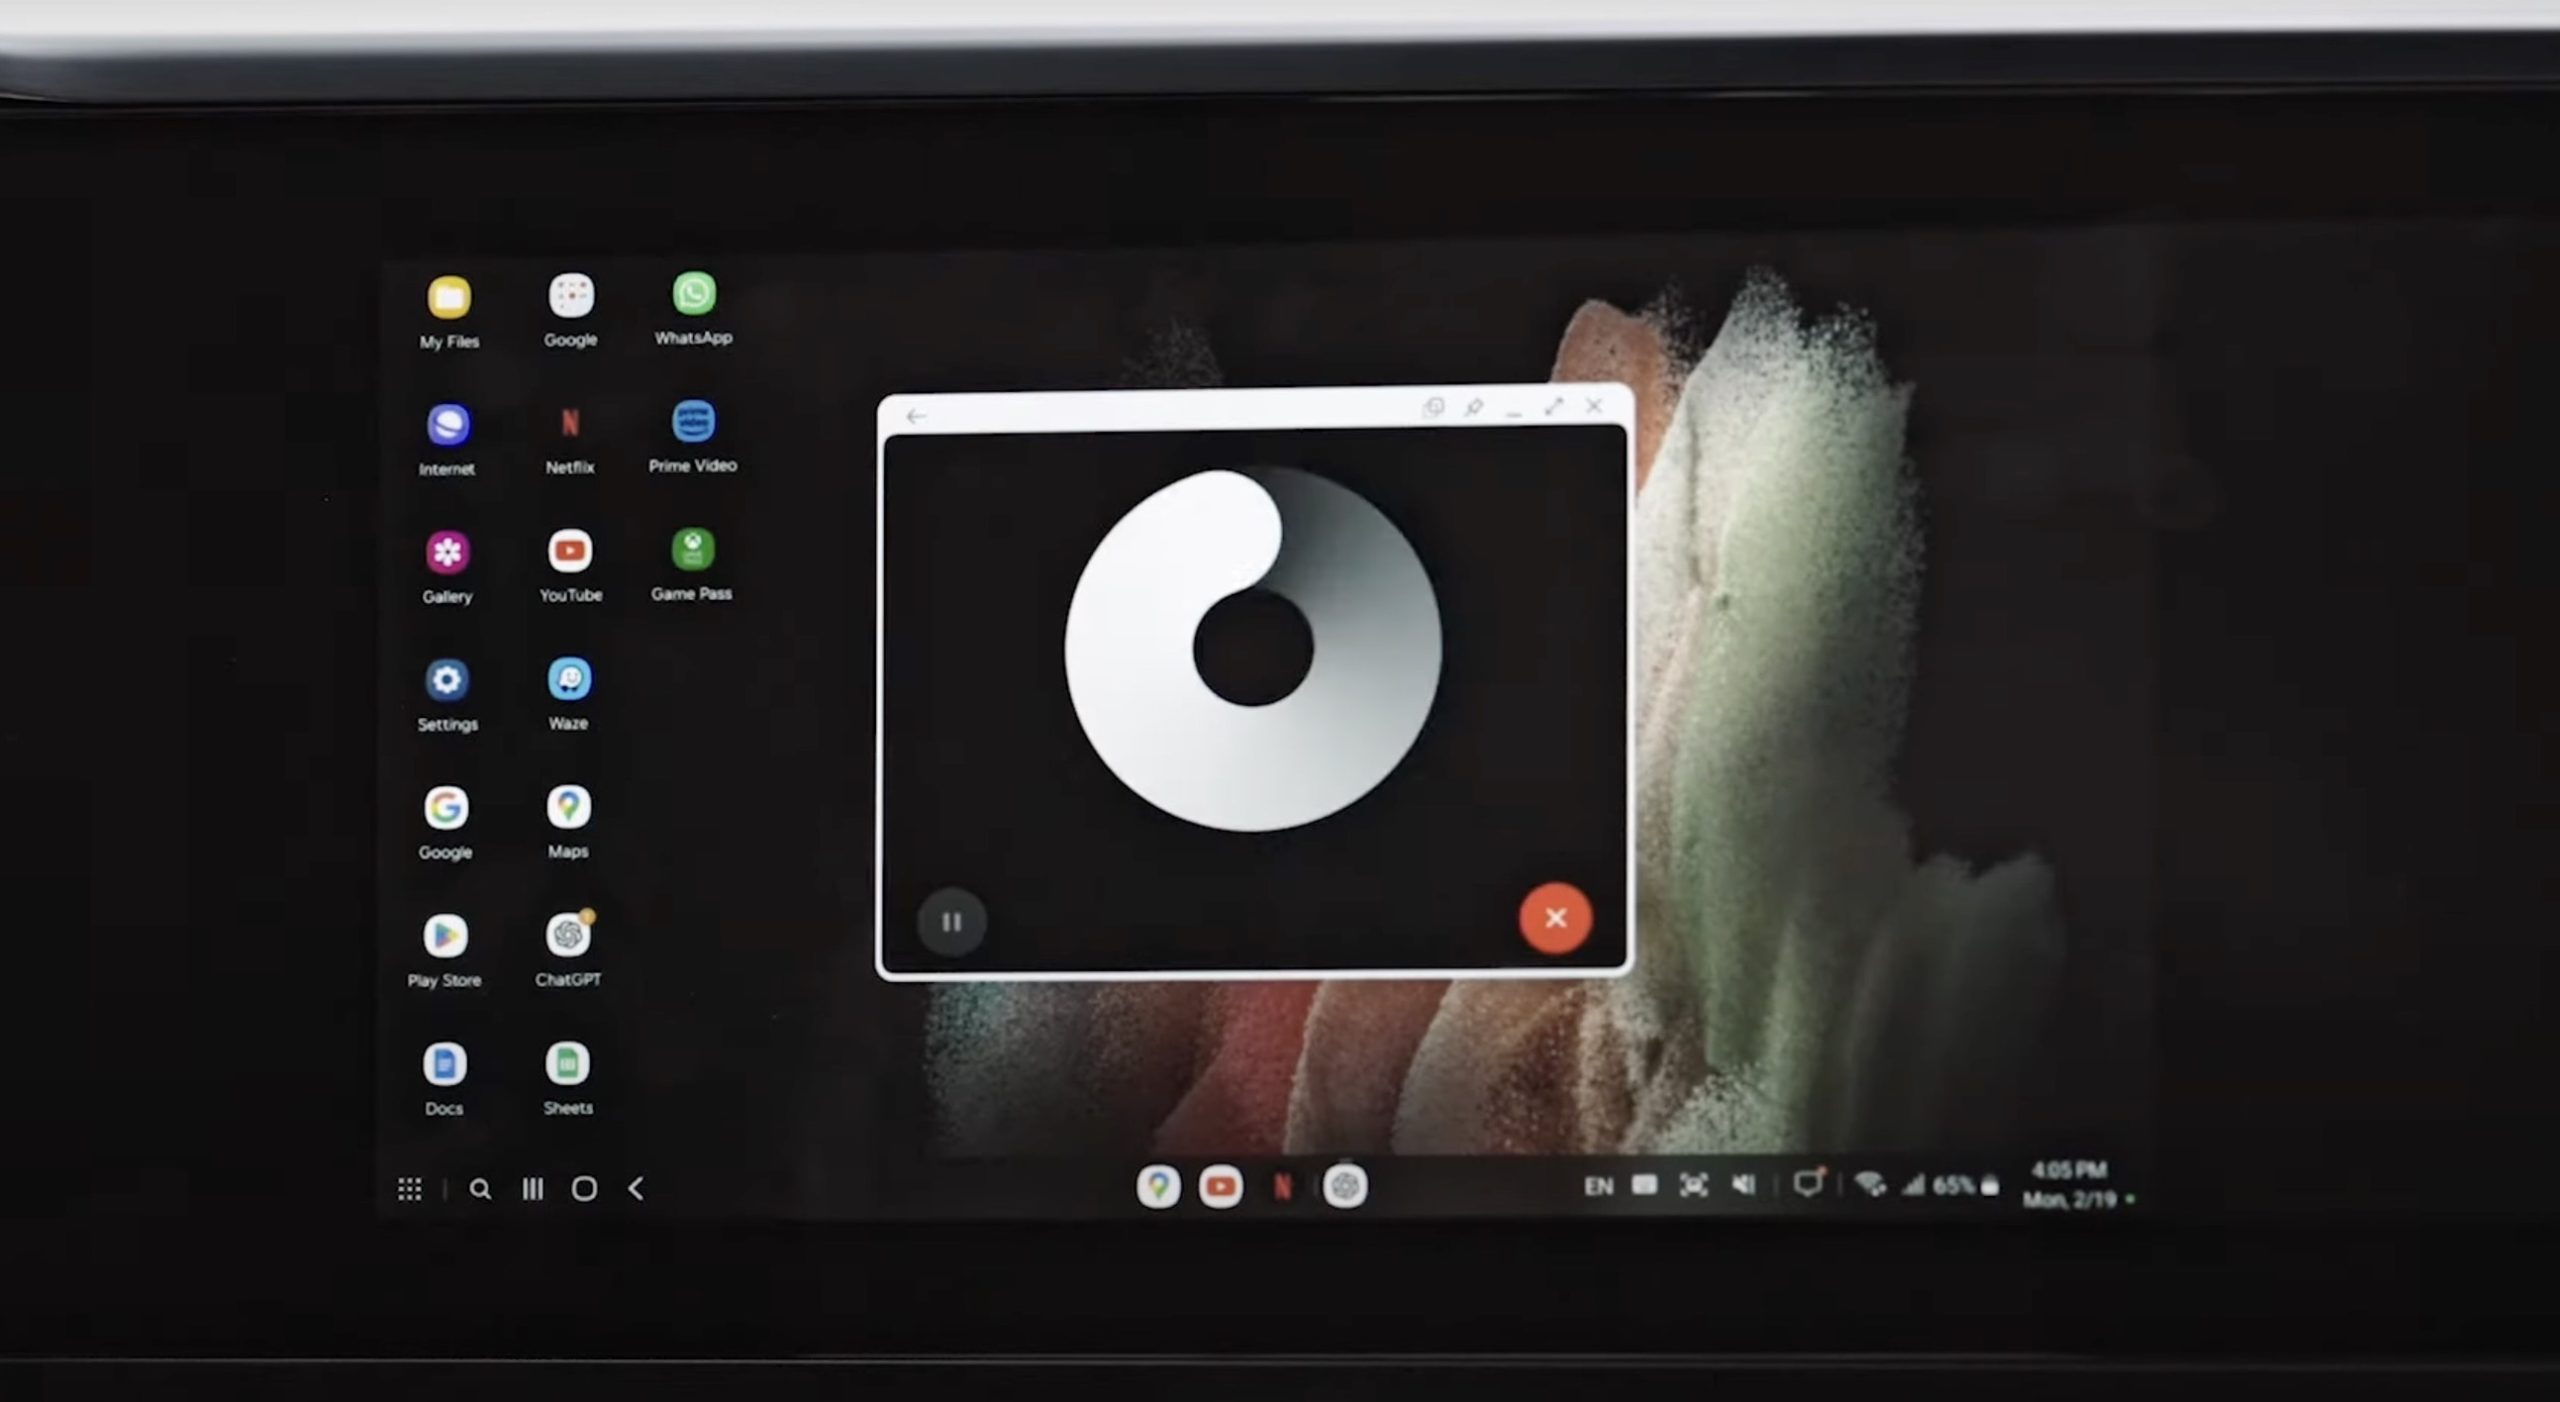 AutoPro X Transforming Car Infotainment into a Laptop Experience